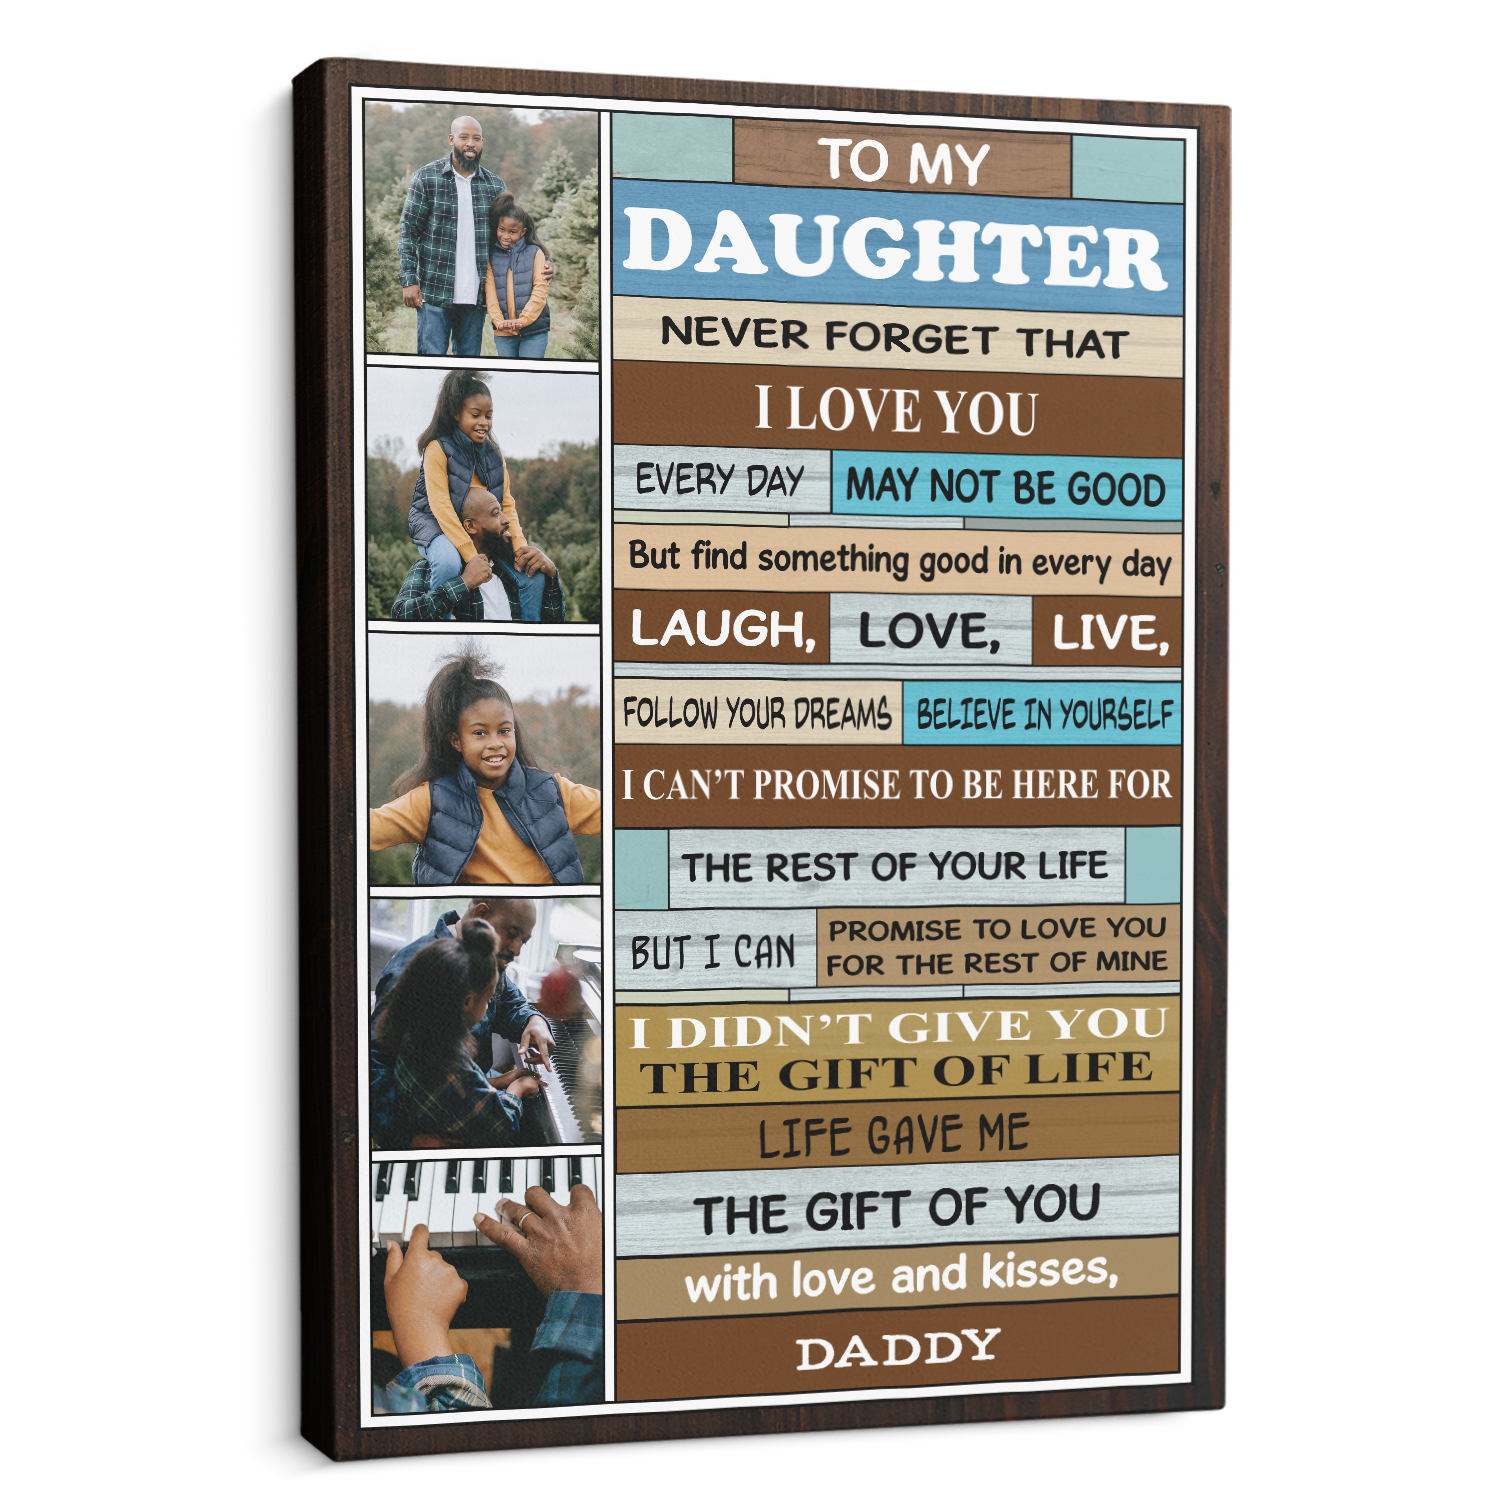 To My Daughter Never Forget That I Love You, Custom Photo, Customizable Text Canvas Art Print